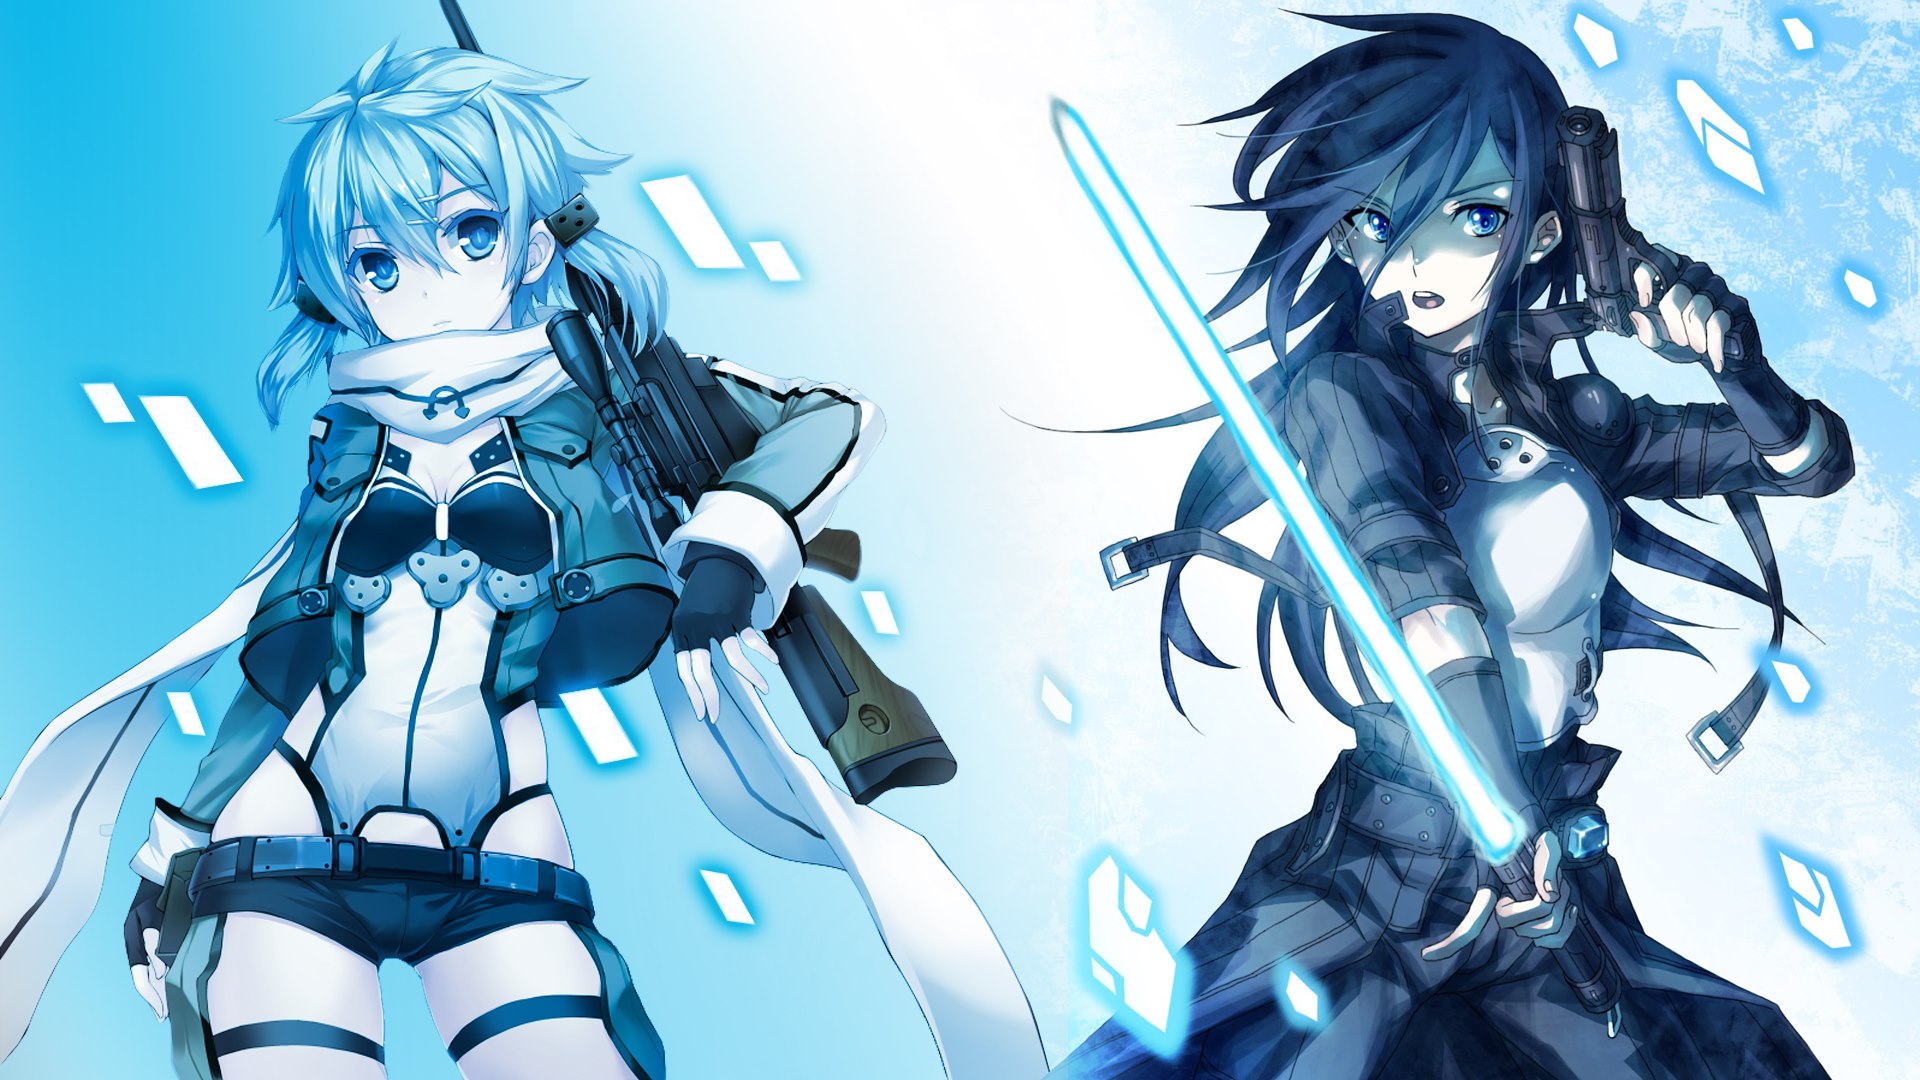 Sinon and Kirito   Gun Gale Online by Darc1n on